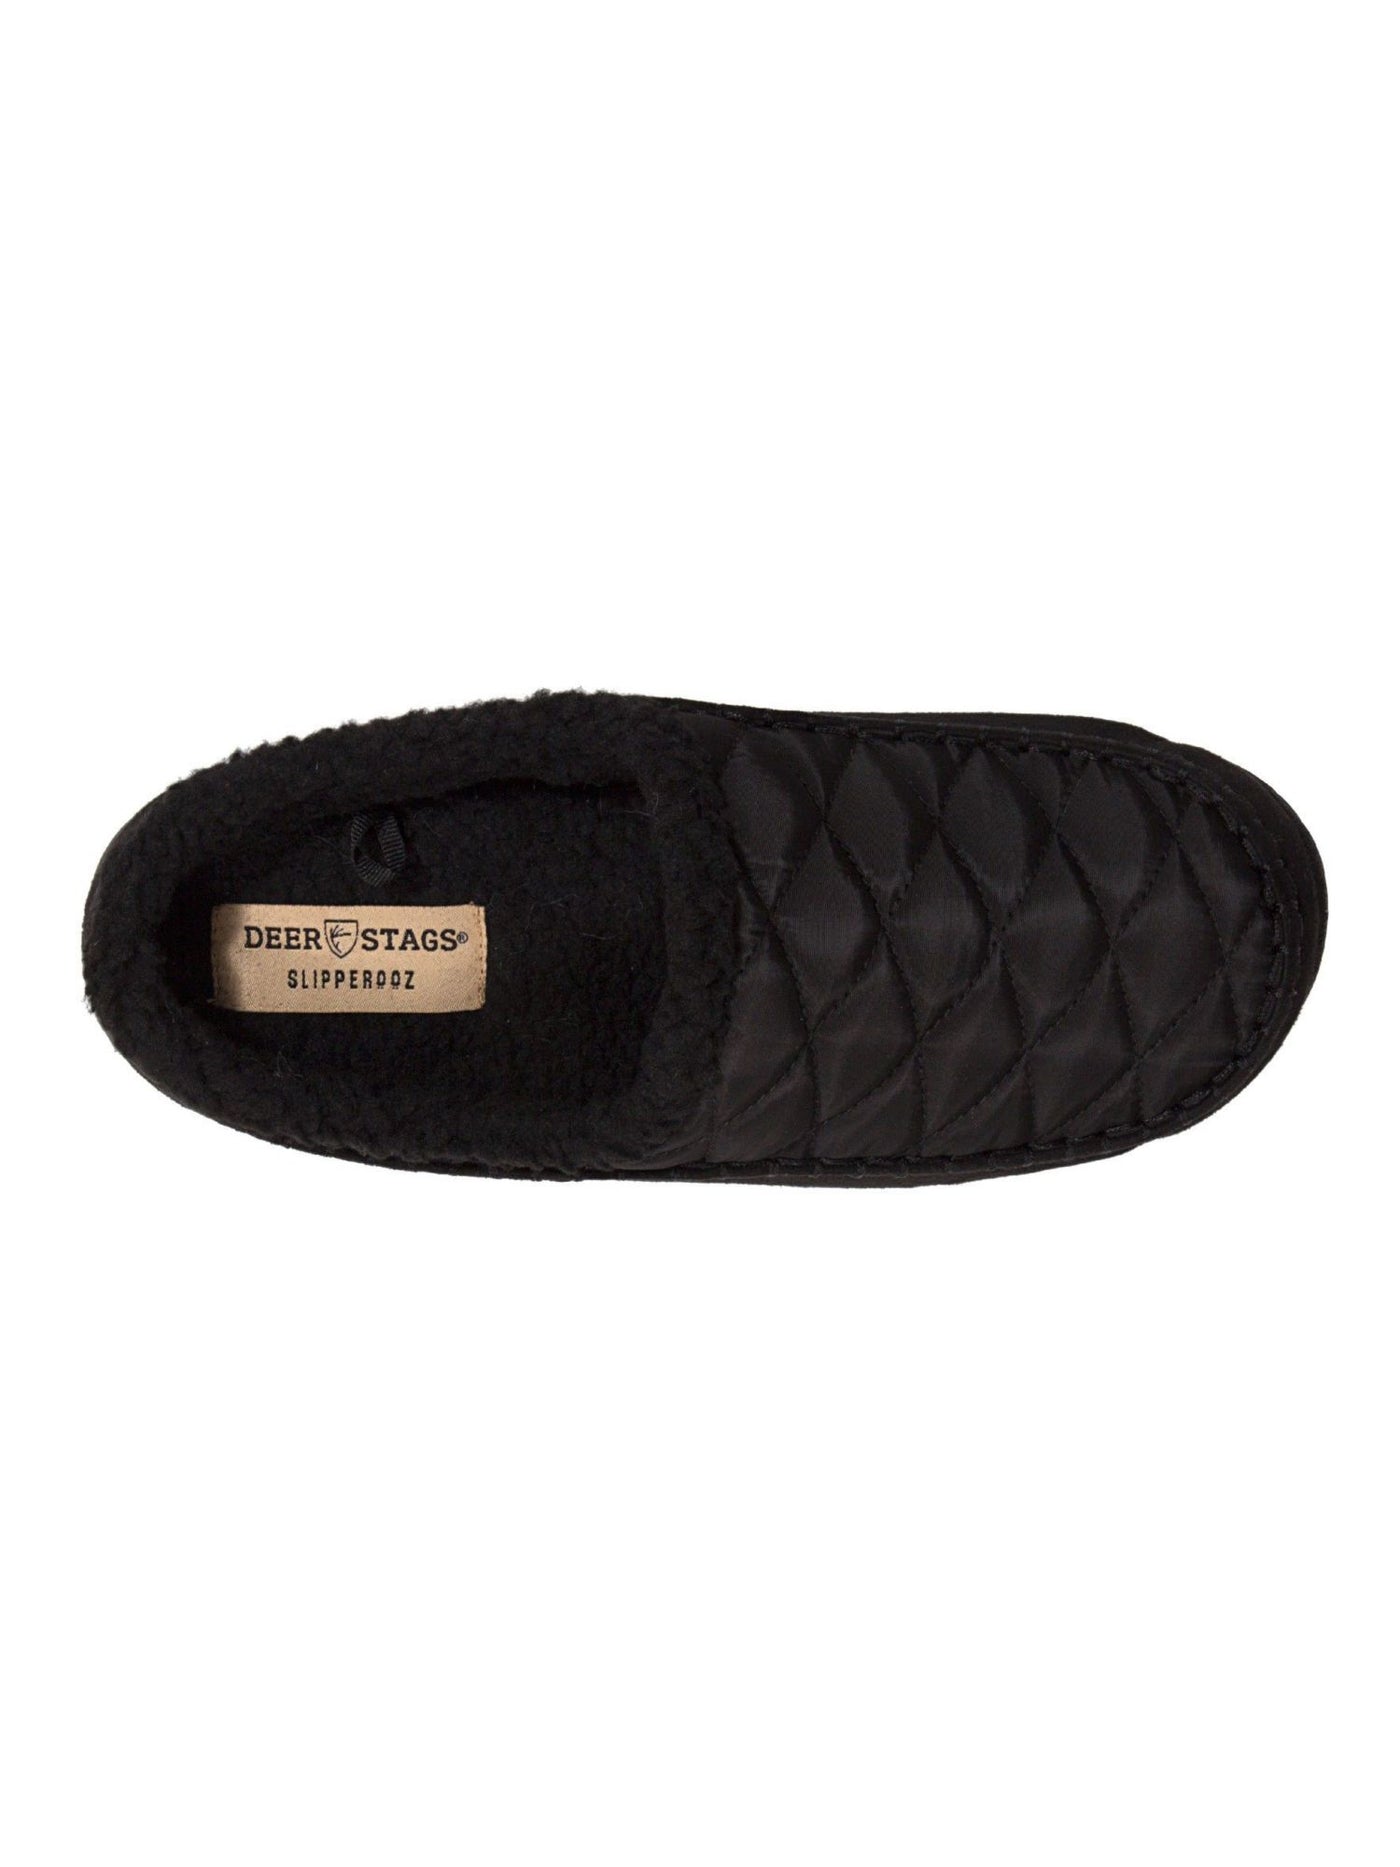 DEER STAGS SLIPPEROOZ Mens Black Quilted Comfort Alma Round Toe Slip On Slippers Shoes 8 M